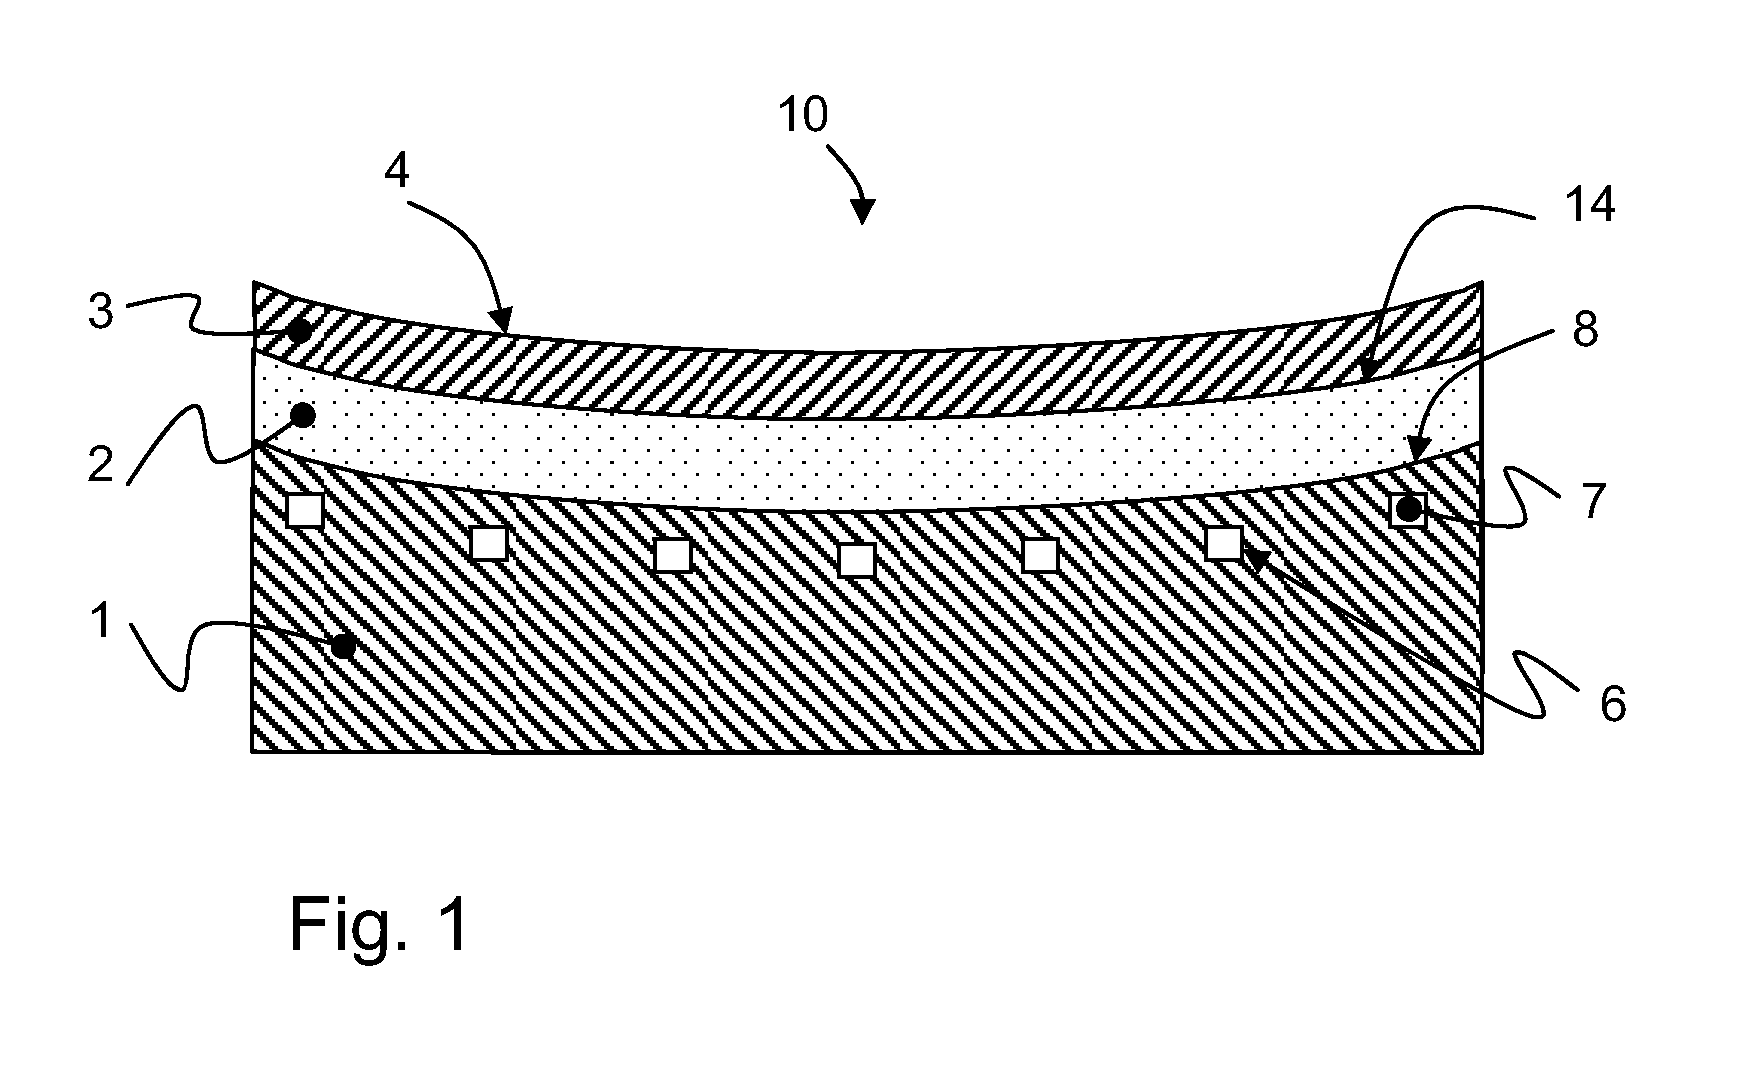 Reflective optical element for use in an EUV system